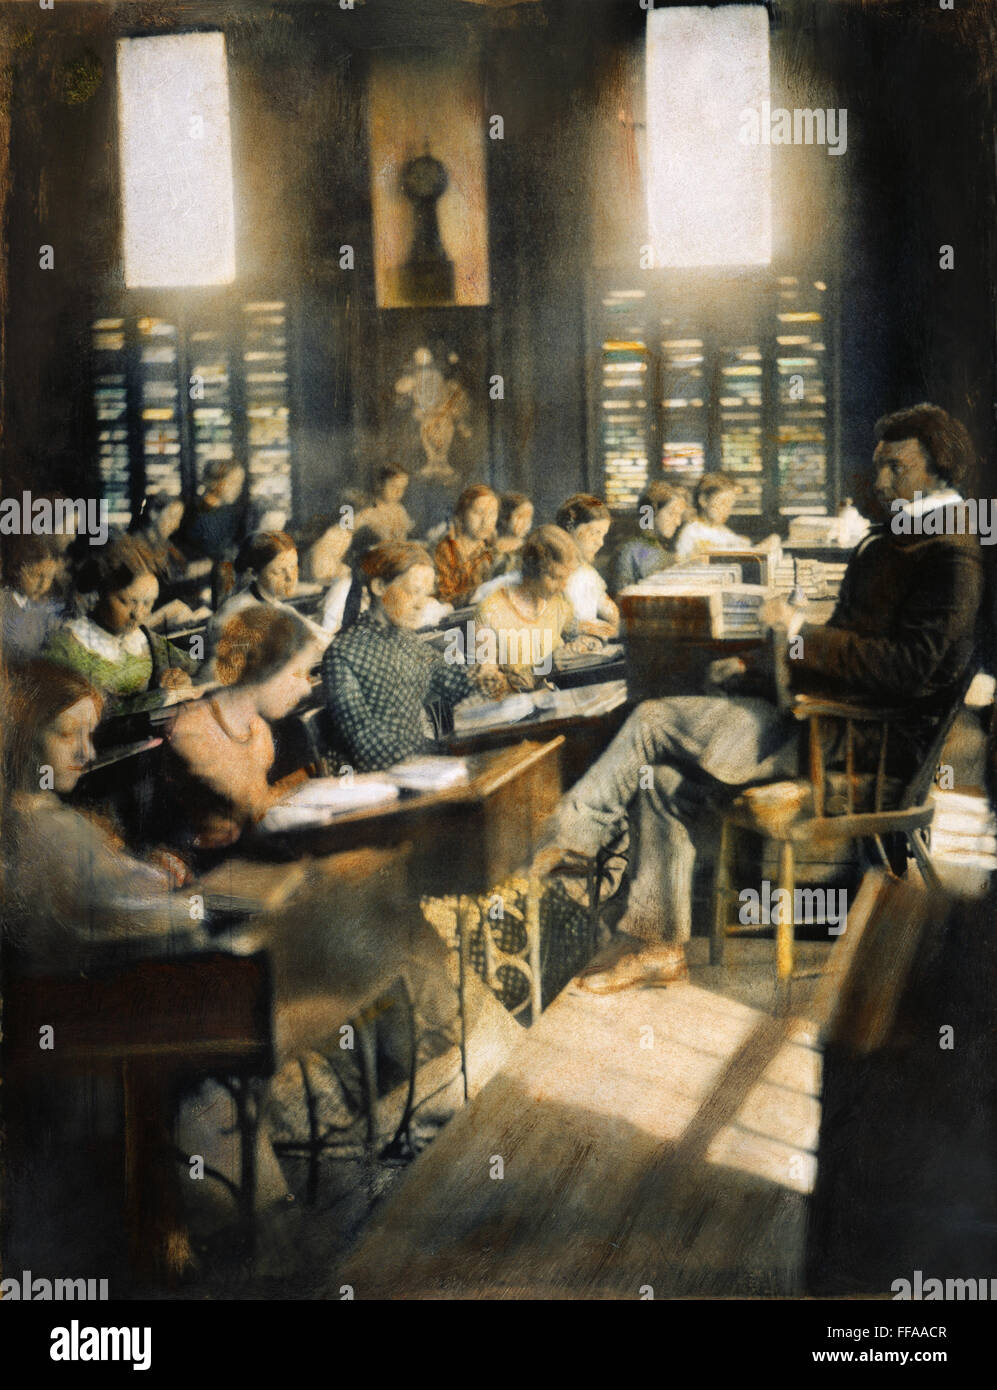 SCHOOL FOR GIRLS, c1850. /nClassroom in the Emerson School for Girls, Boston, Massachusetts. Oil over a daguerreotype, c1850, by Southworth & Hawes. Stock Photo